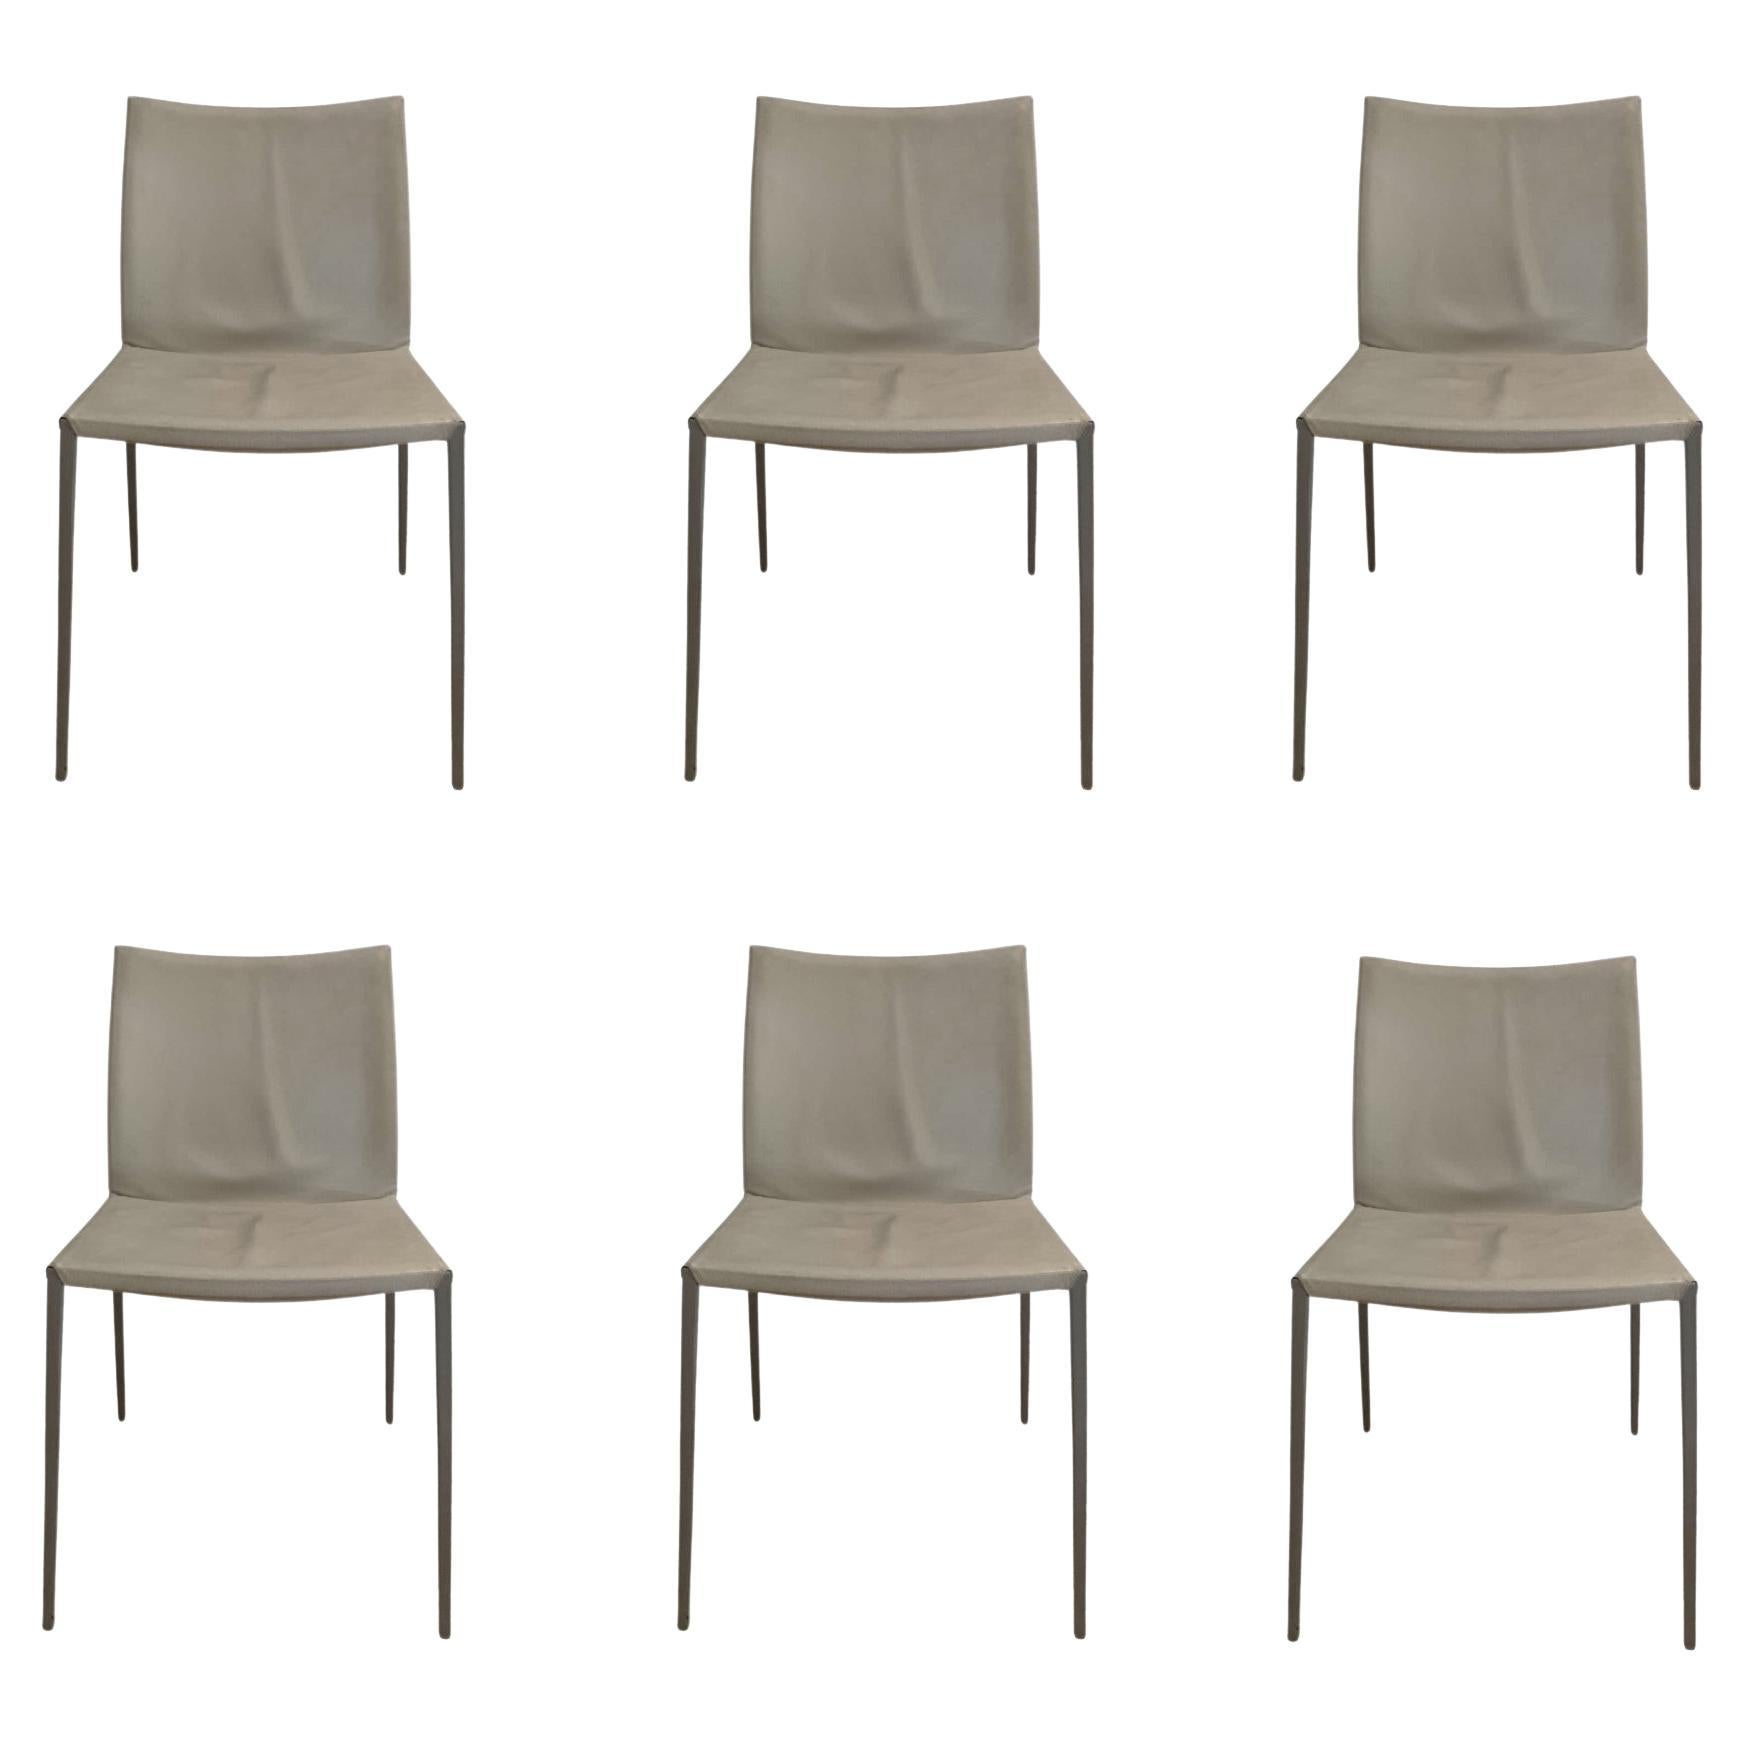 In Stock in Los Angeles, Set of 6 Lia Leather Dining Chair by Roberto Barbieri